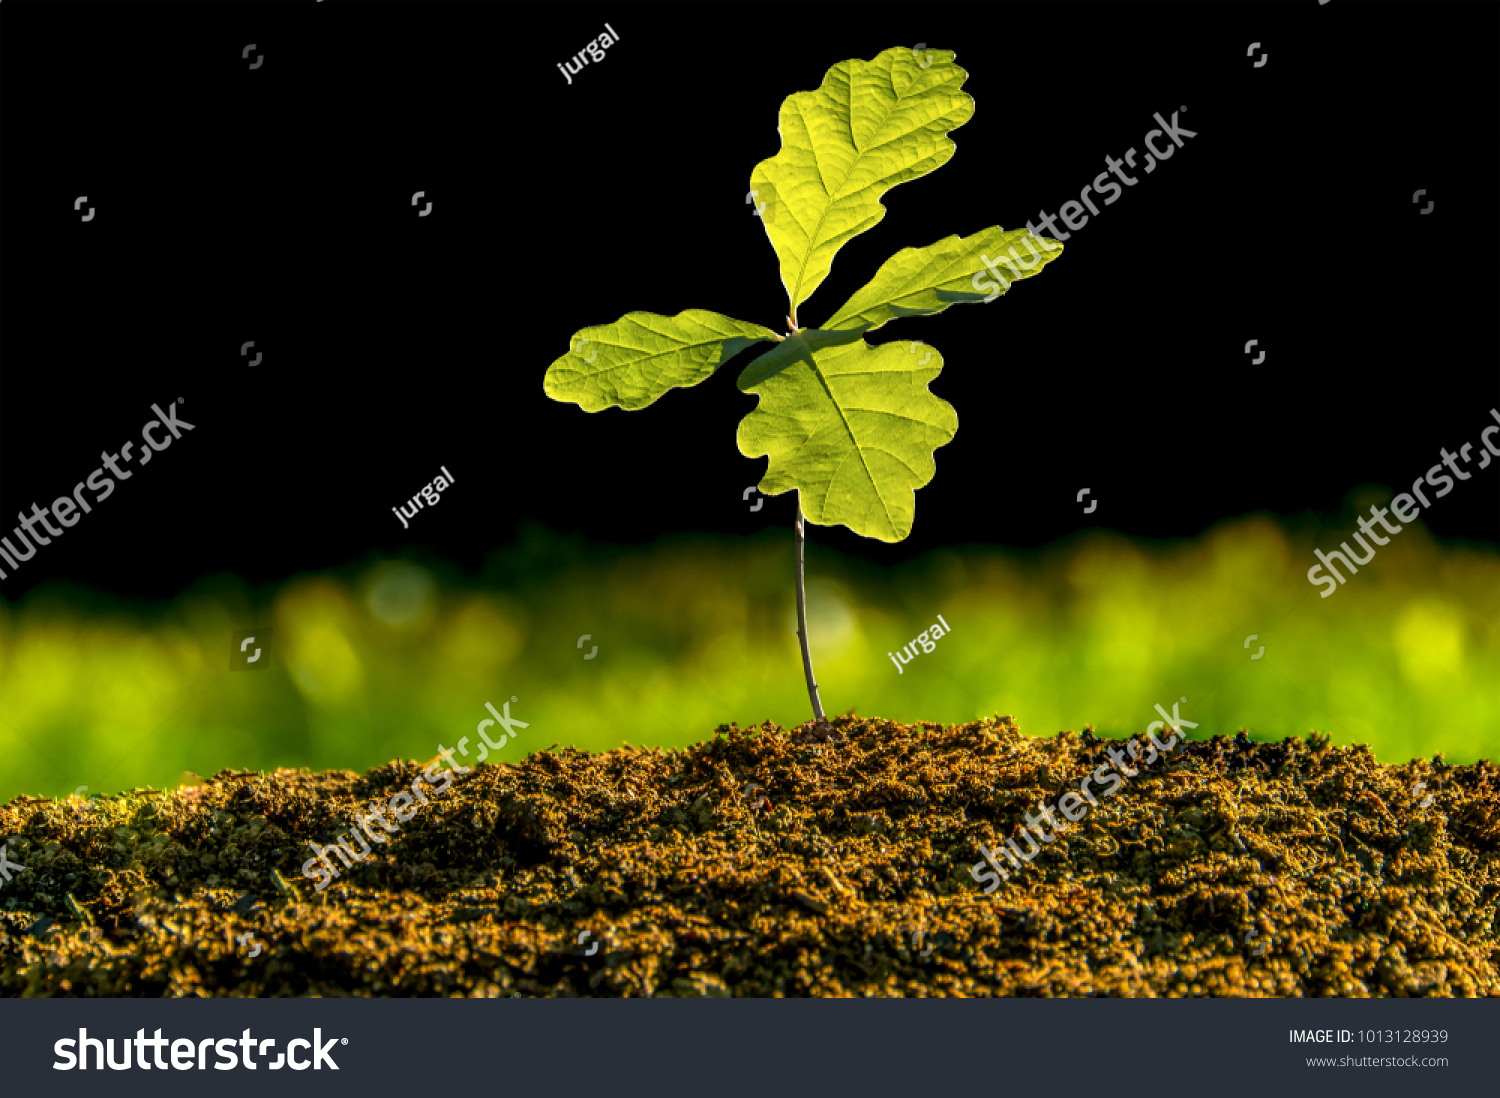 Small oak plant in the garden. Tree oak planted in the soil substrate. Seedlings or plants illuminated by the side light. Highly lighted oak leaves with dark background and green grass. #1013128939